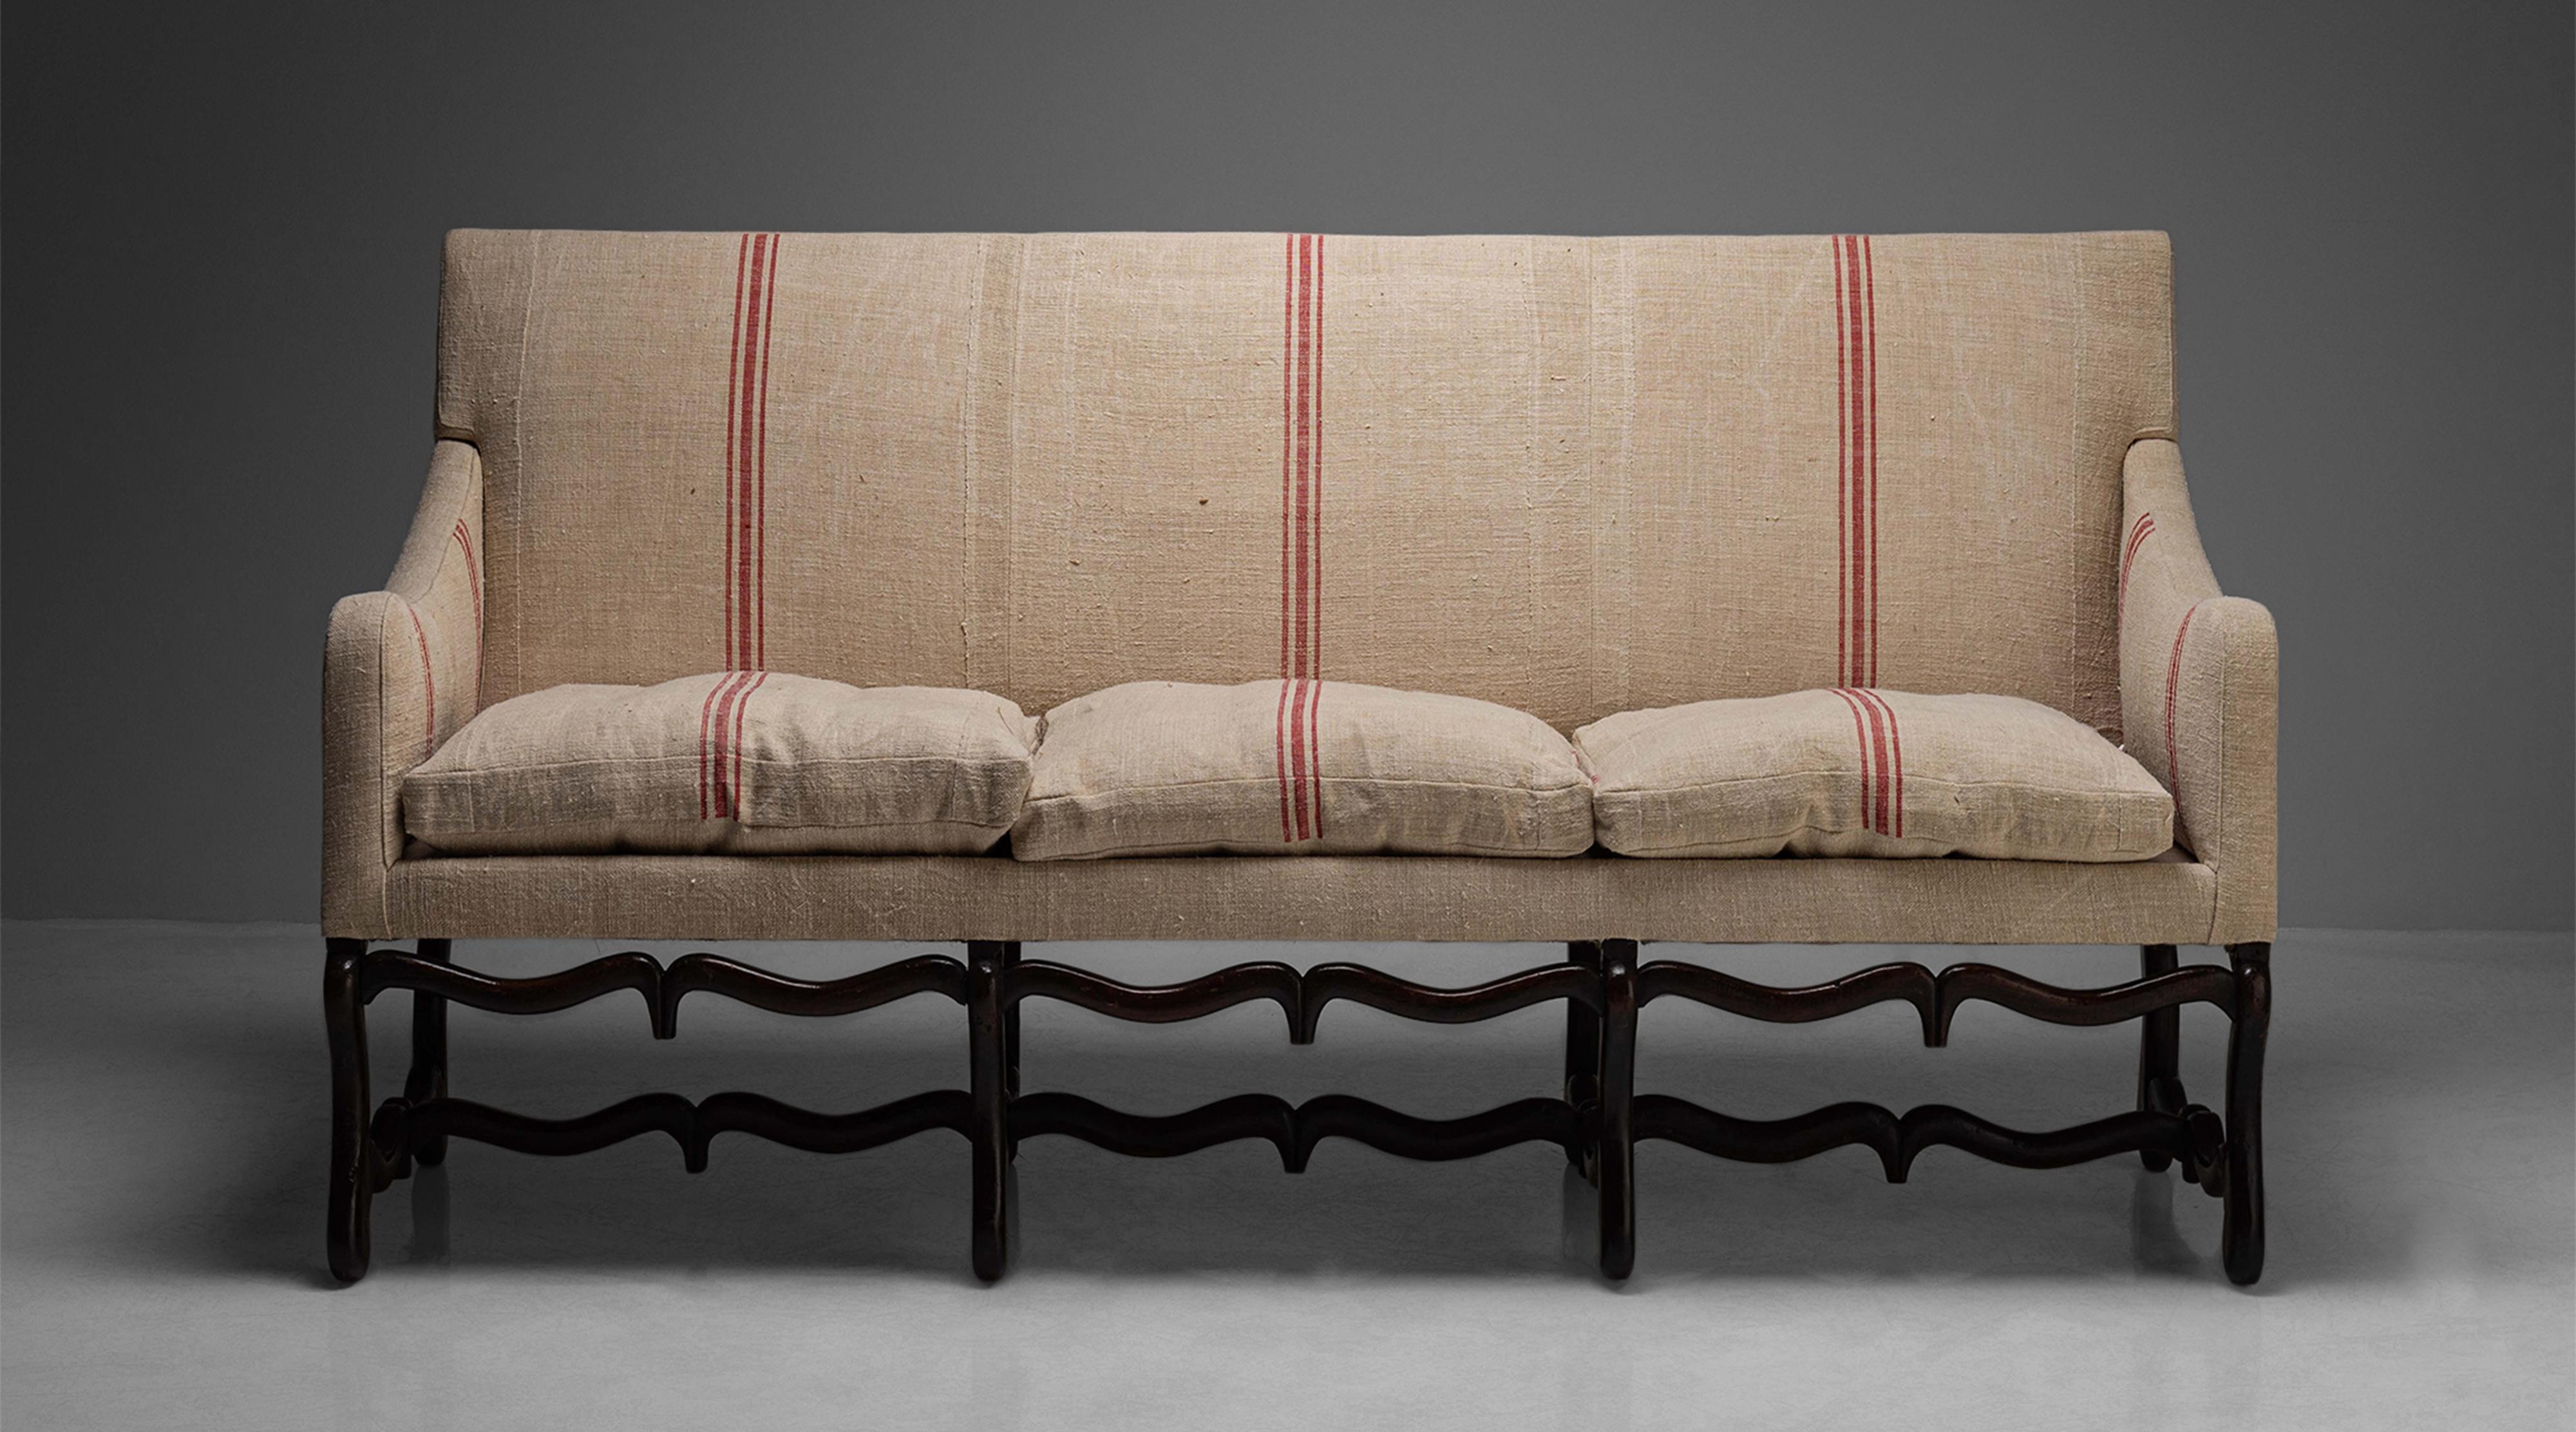 Os de Mouton Sofa, France, circa 1790

Beautifully carved frame with unique double stretcher. Seats and back have been newly upholstered in antique linen.

Measures: 79” W x 30” D x 42” H x 18.5” seat.